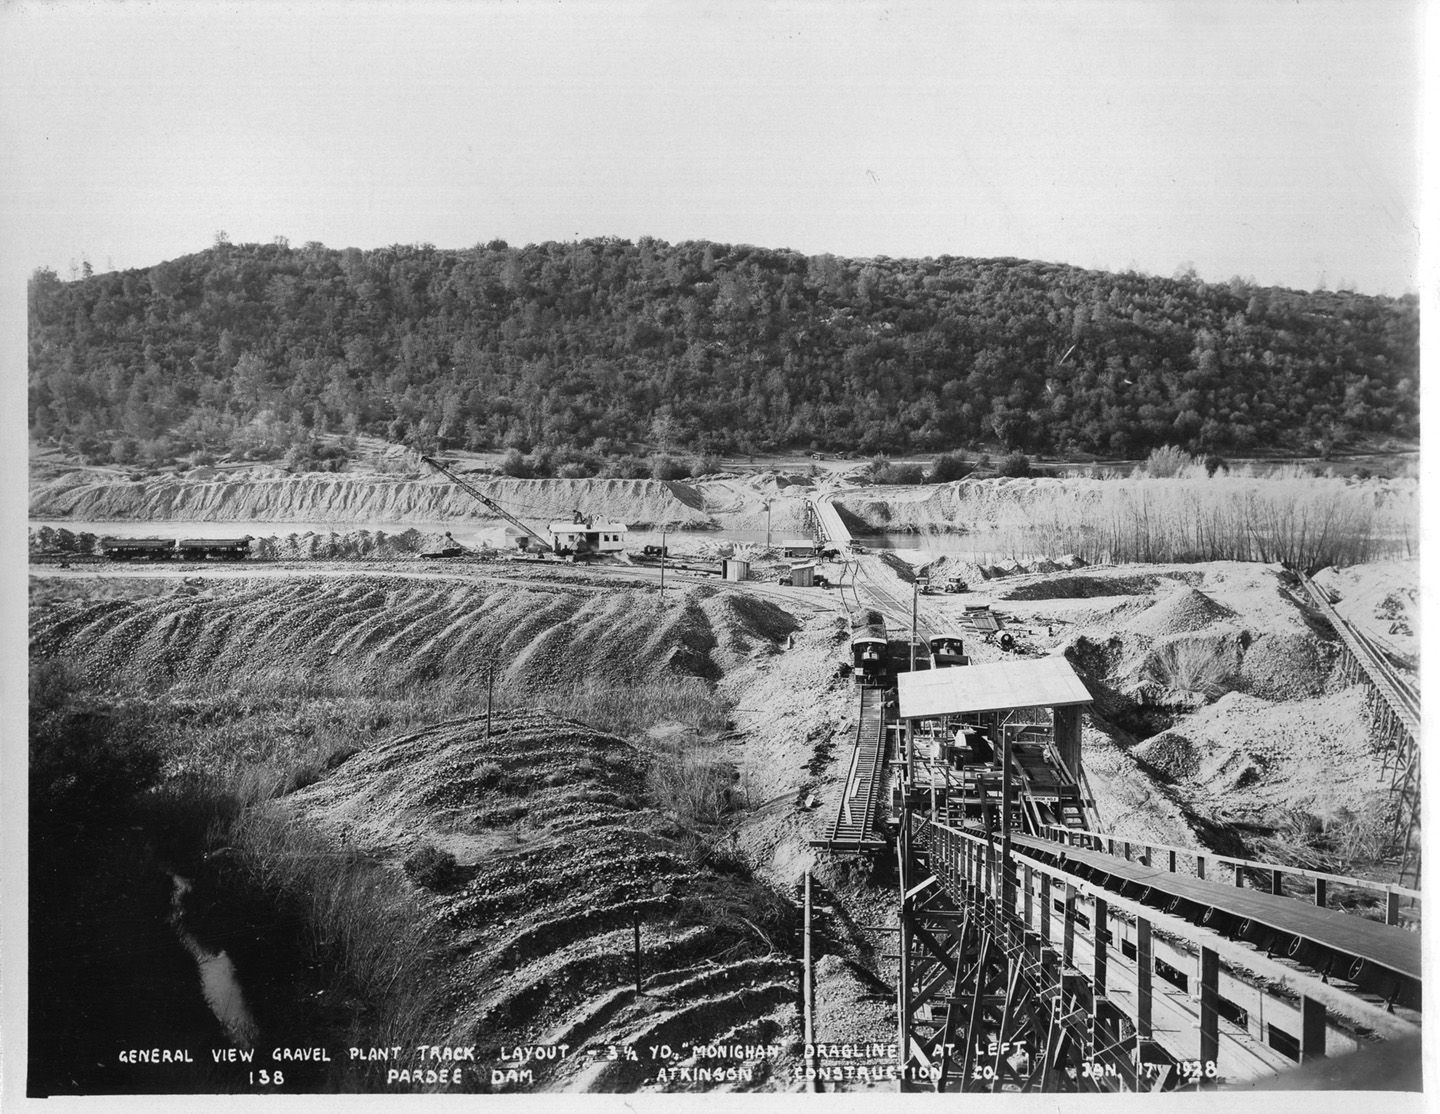 General view gravel plant track layout - 3 1/2 yd, Monighan dragline at left.	(January 1928)